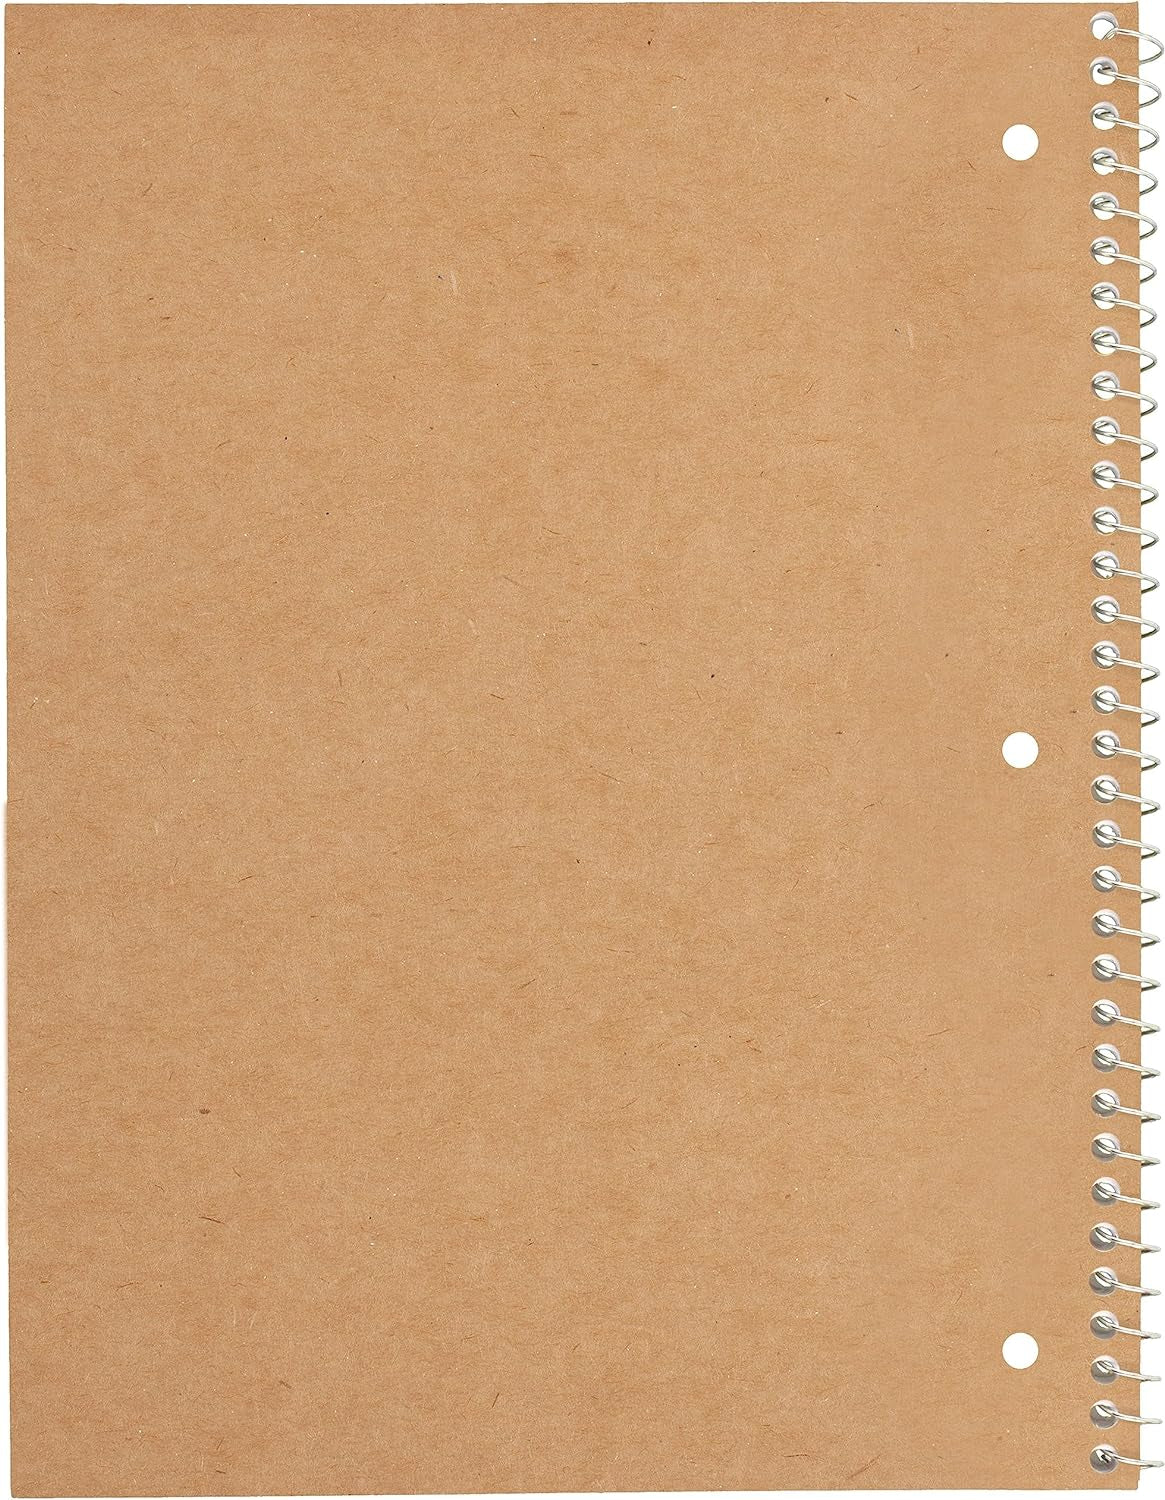 Spiral Notebooks, 6 Pack, 1-Subject, Wide Ruled Paper, 8" X 10-1/2", 70 Sheets, Assorted Pastel Colors (930050-ECM)